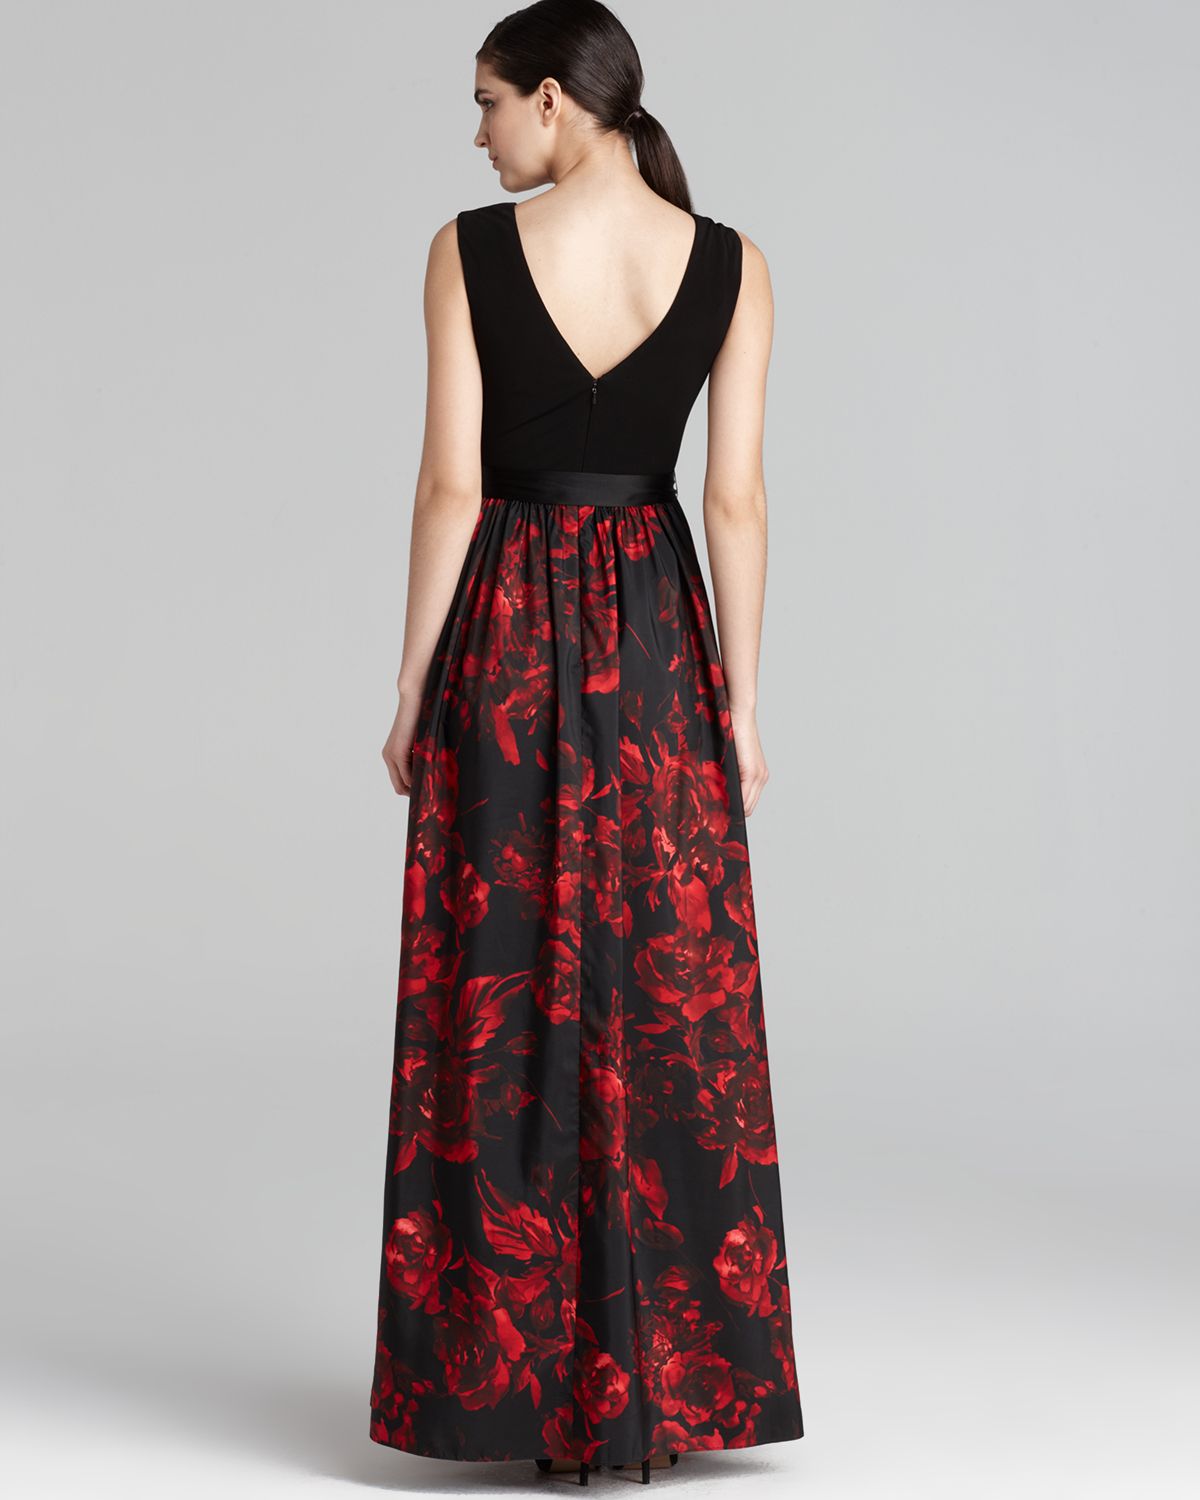 Lyst - Aidan Mattox Gown Sleeveless with Floral Printed Skirt in Black